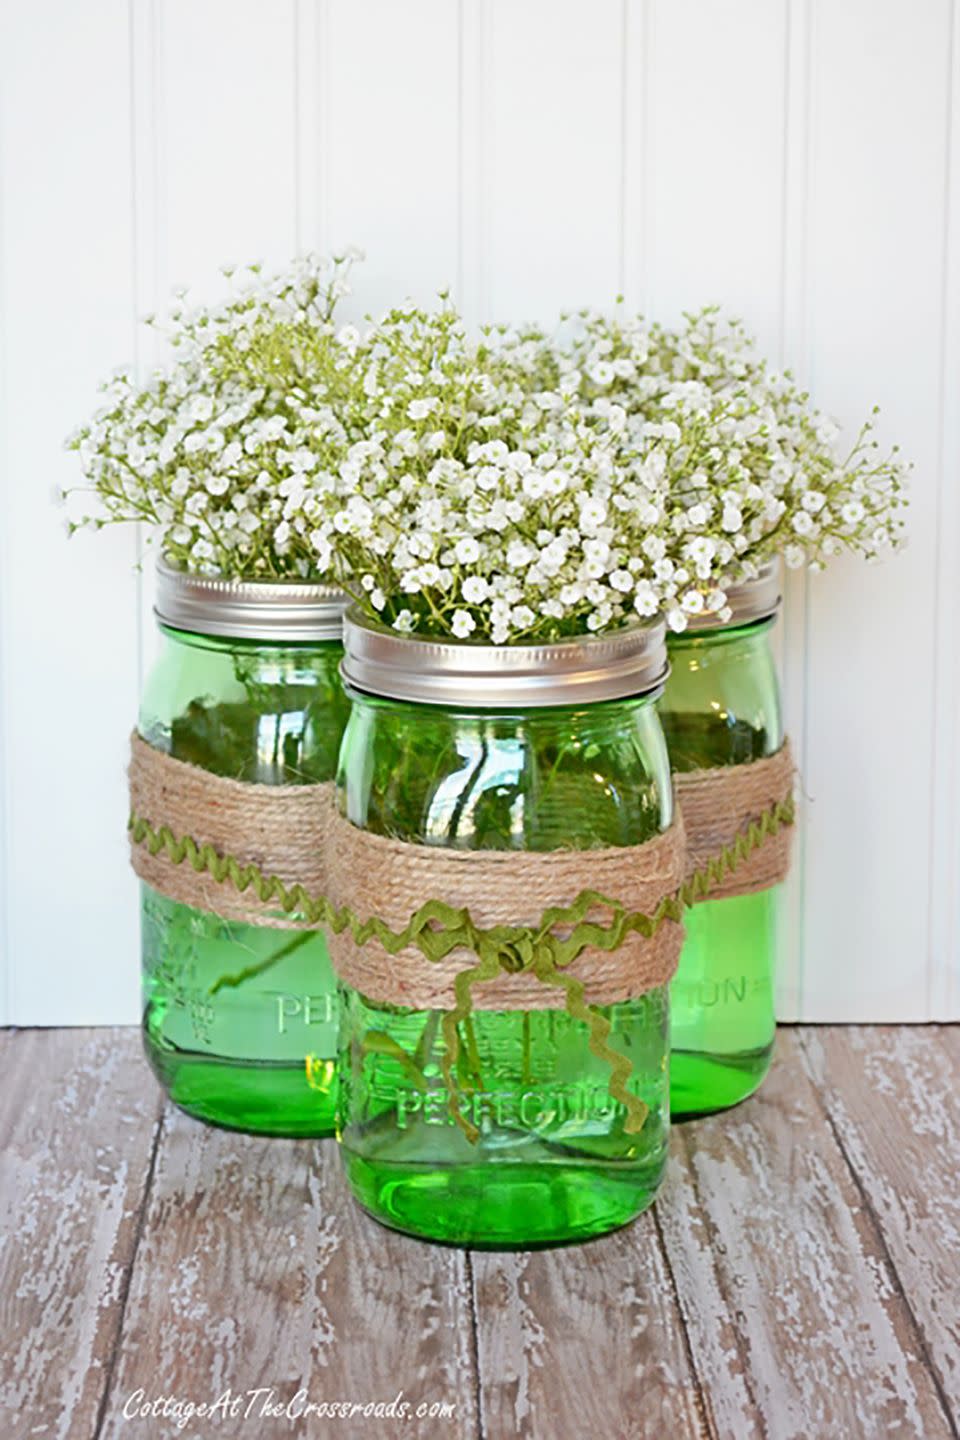 St. Patrick's Day Centerpiece With Green Jars